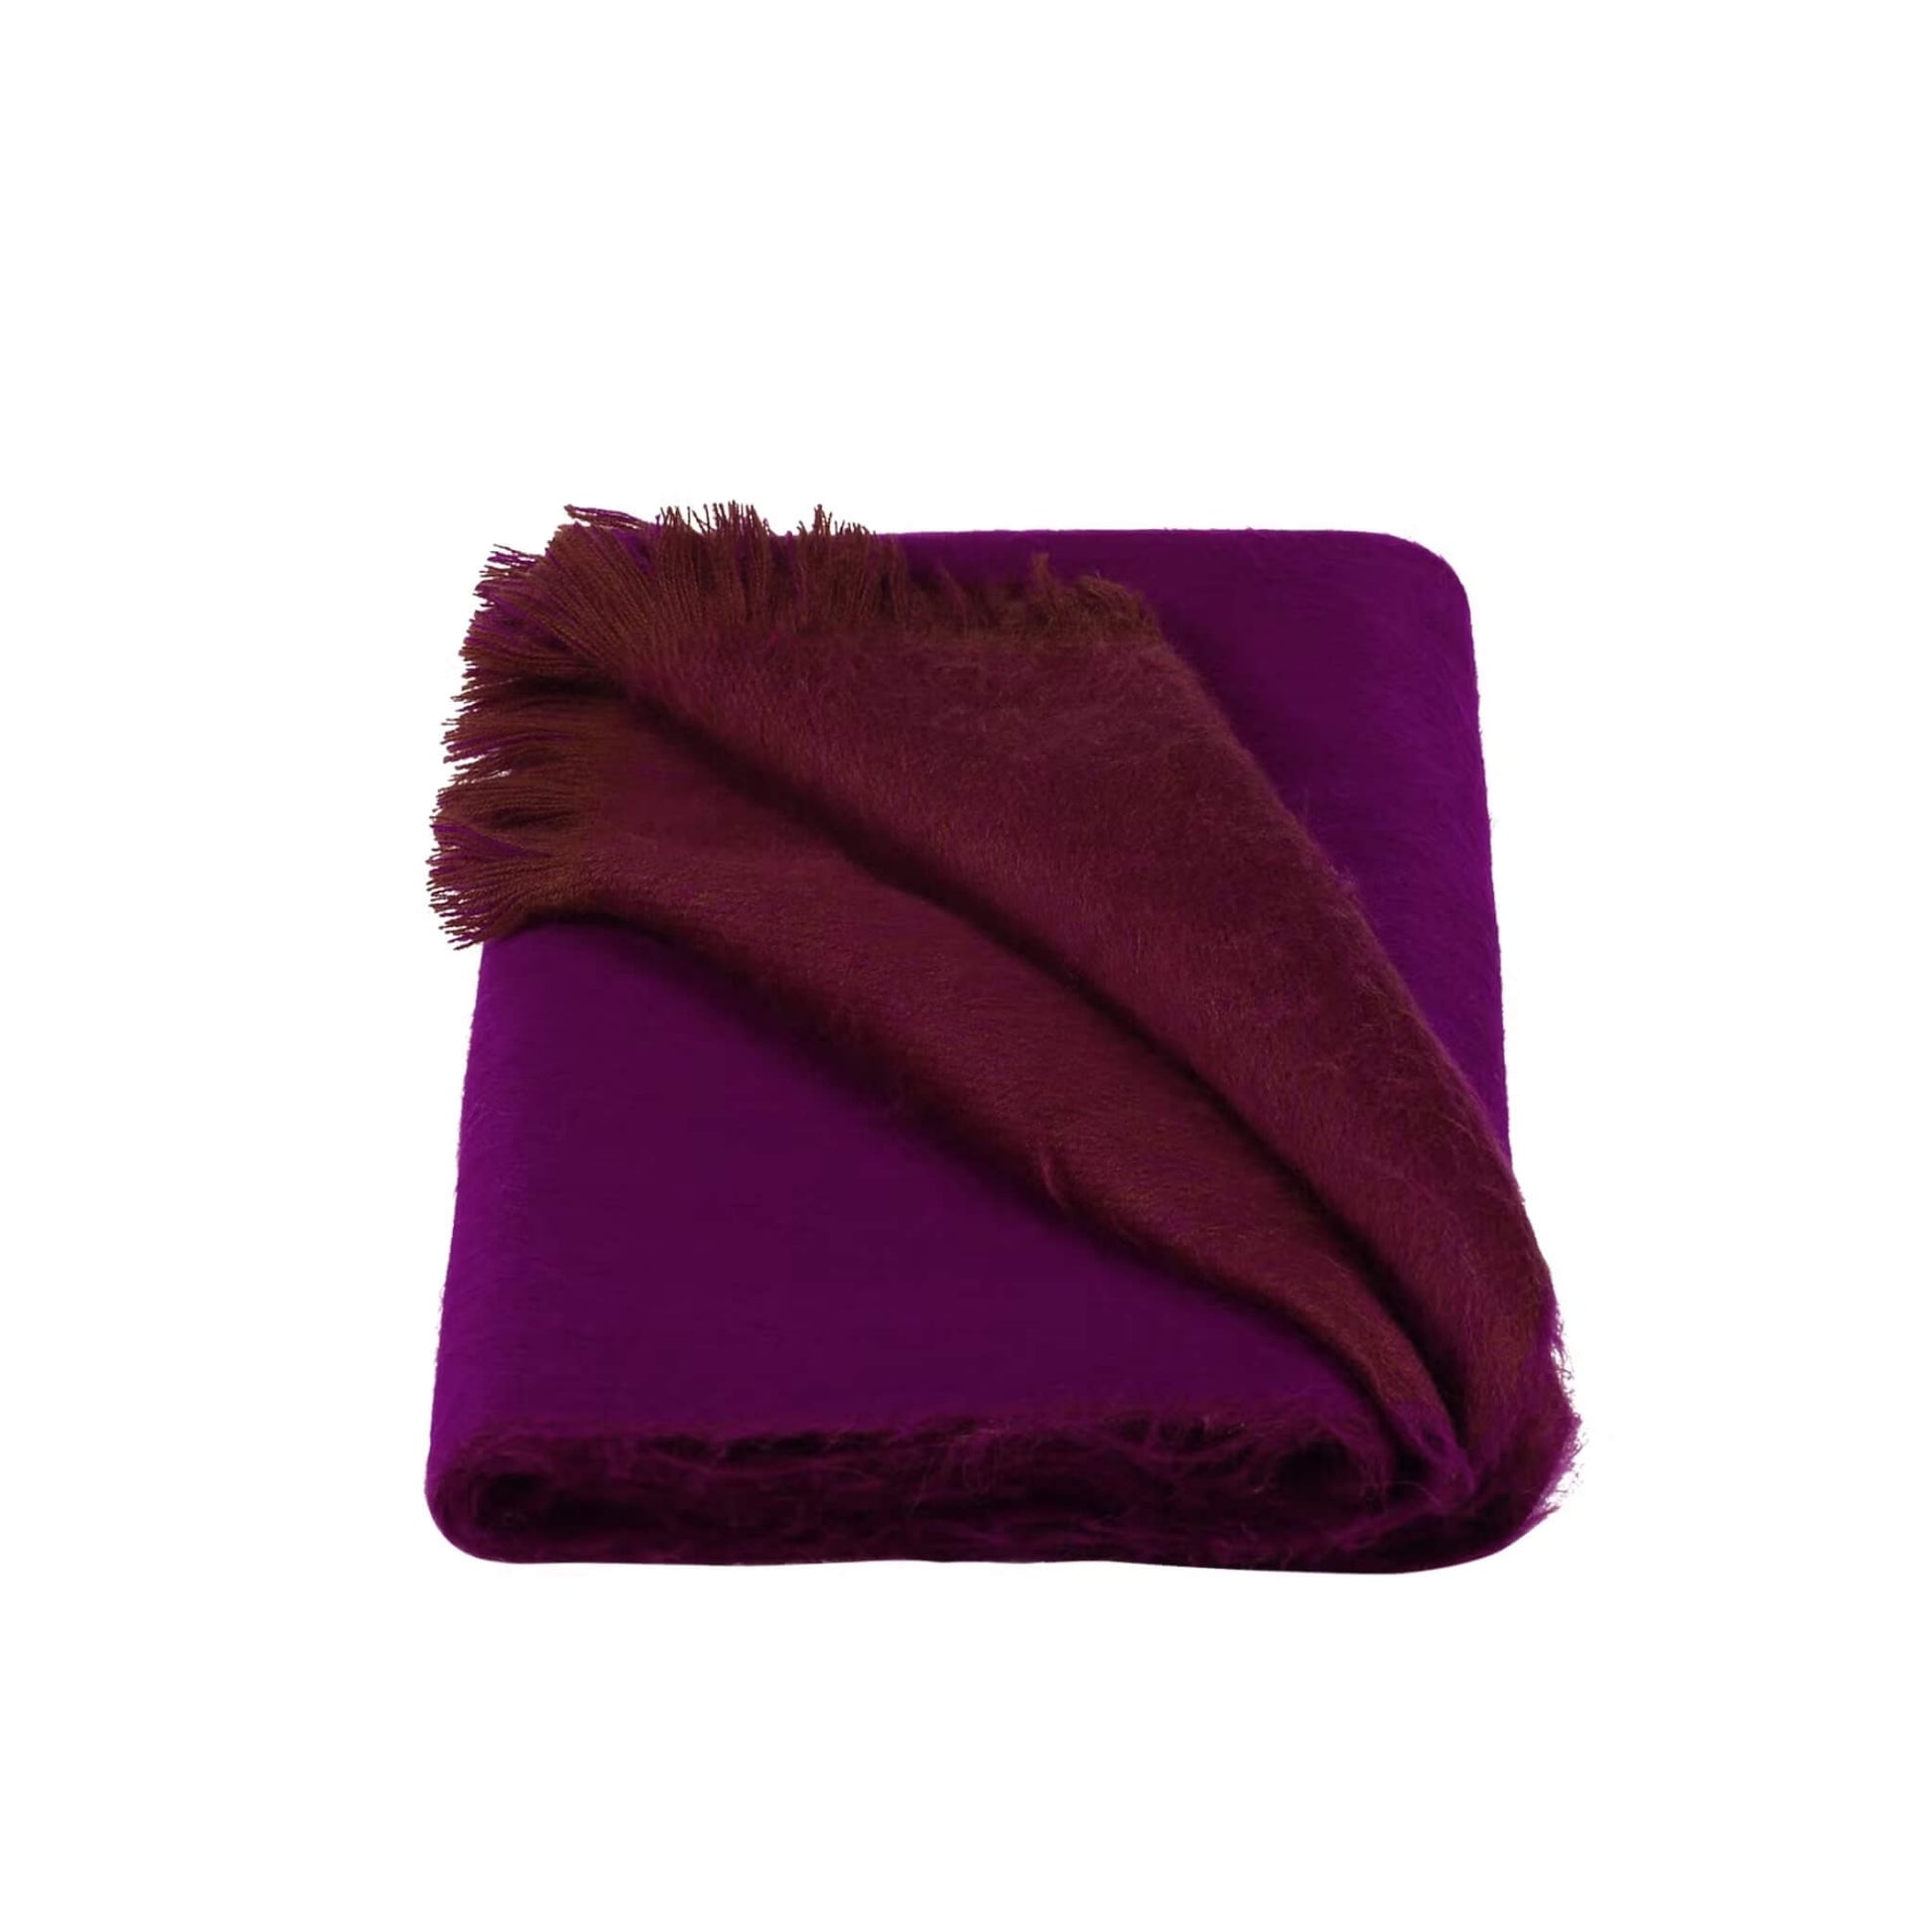 Alpaca Double Scarf Plum red & Chocolate brown - Unik by Nature